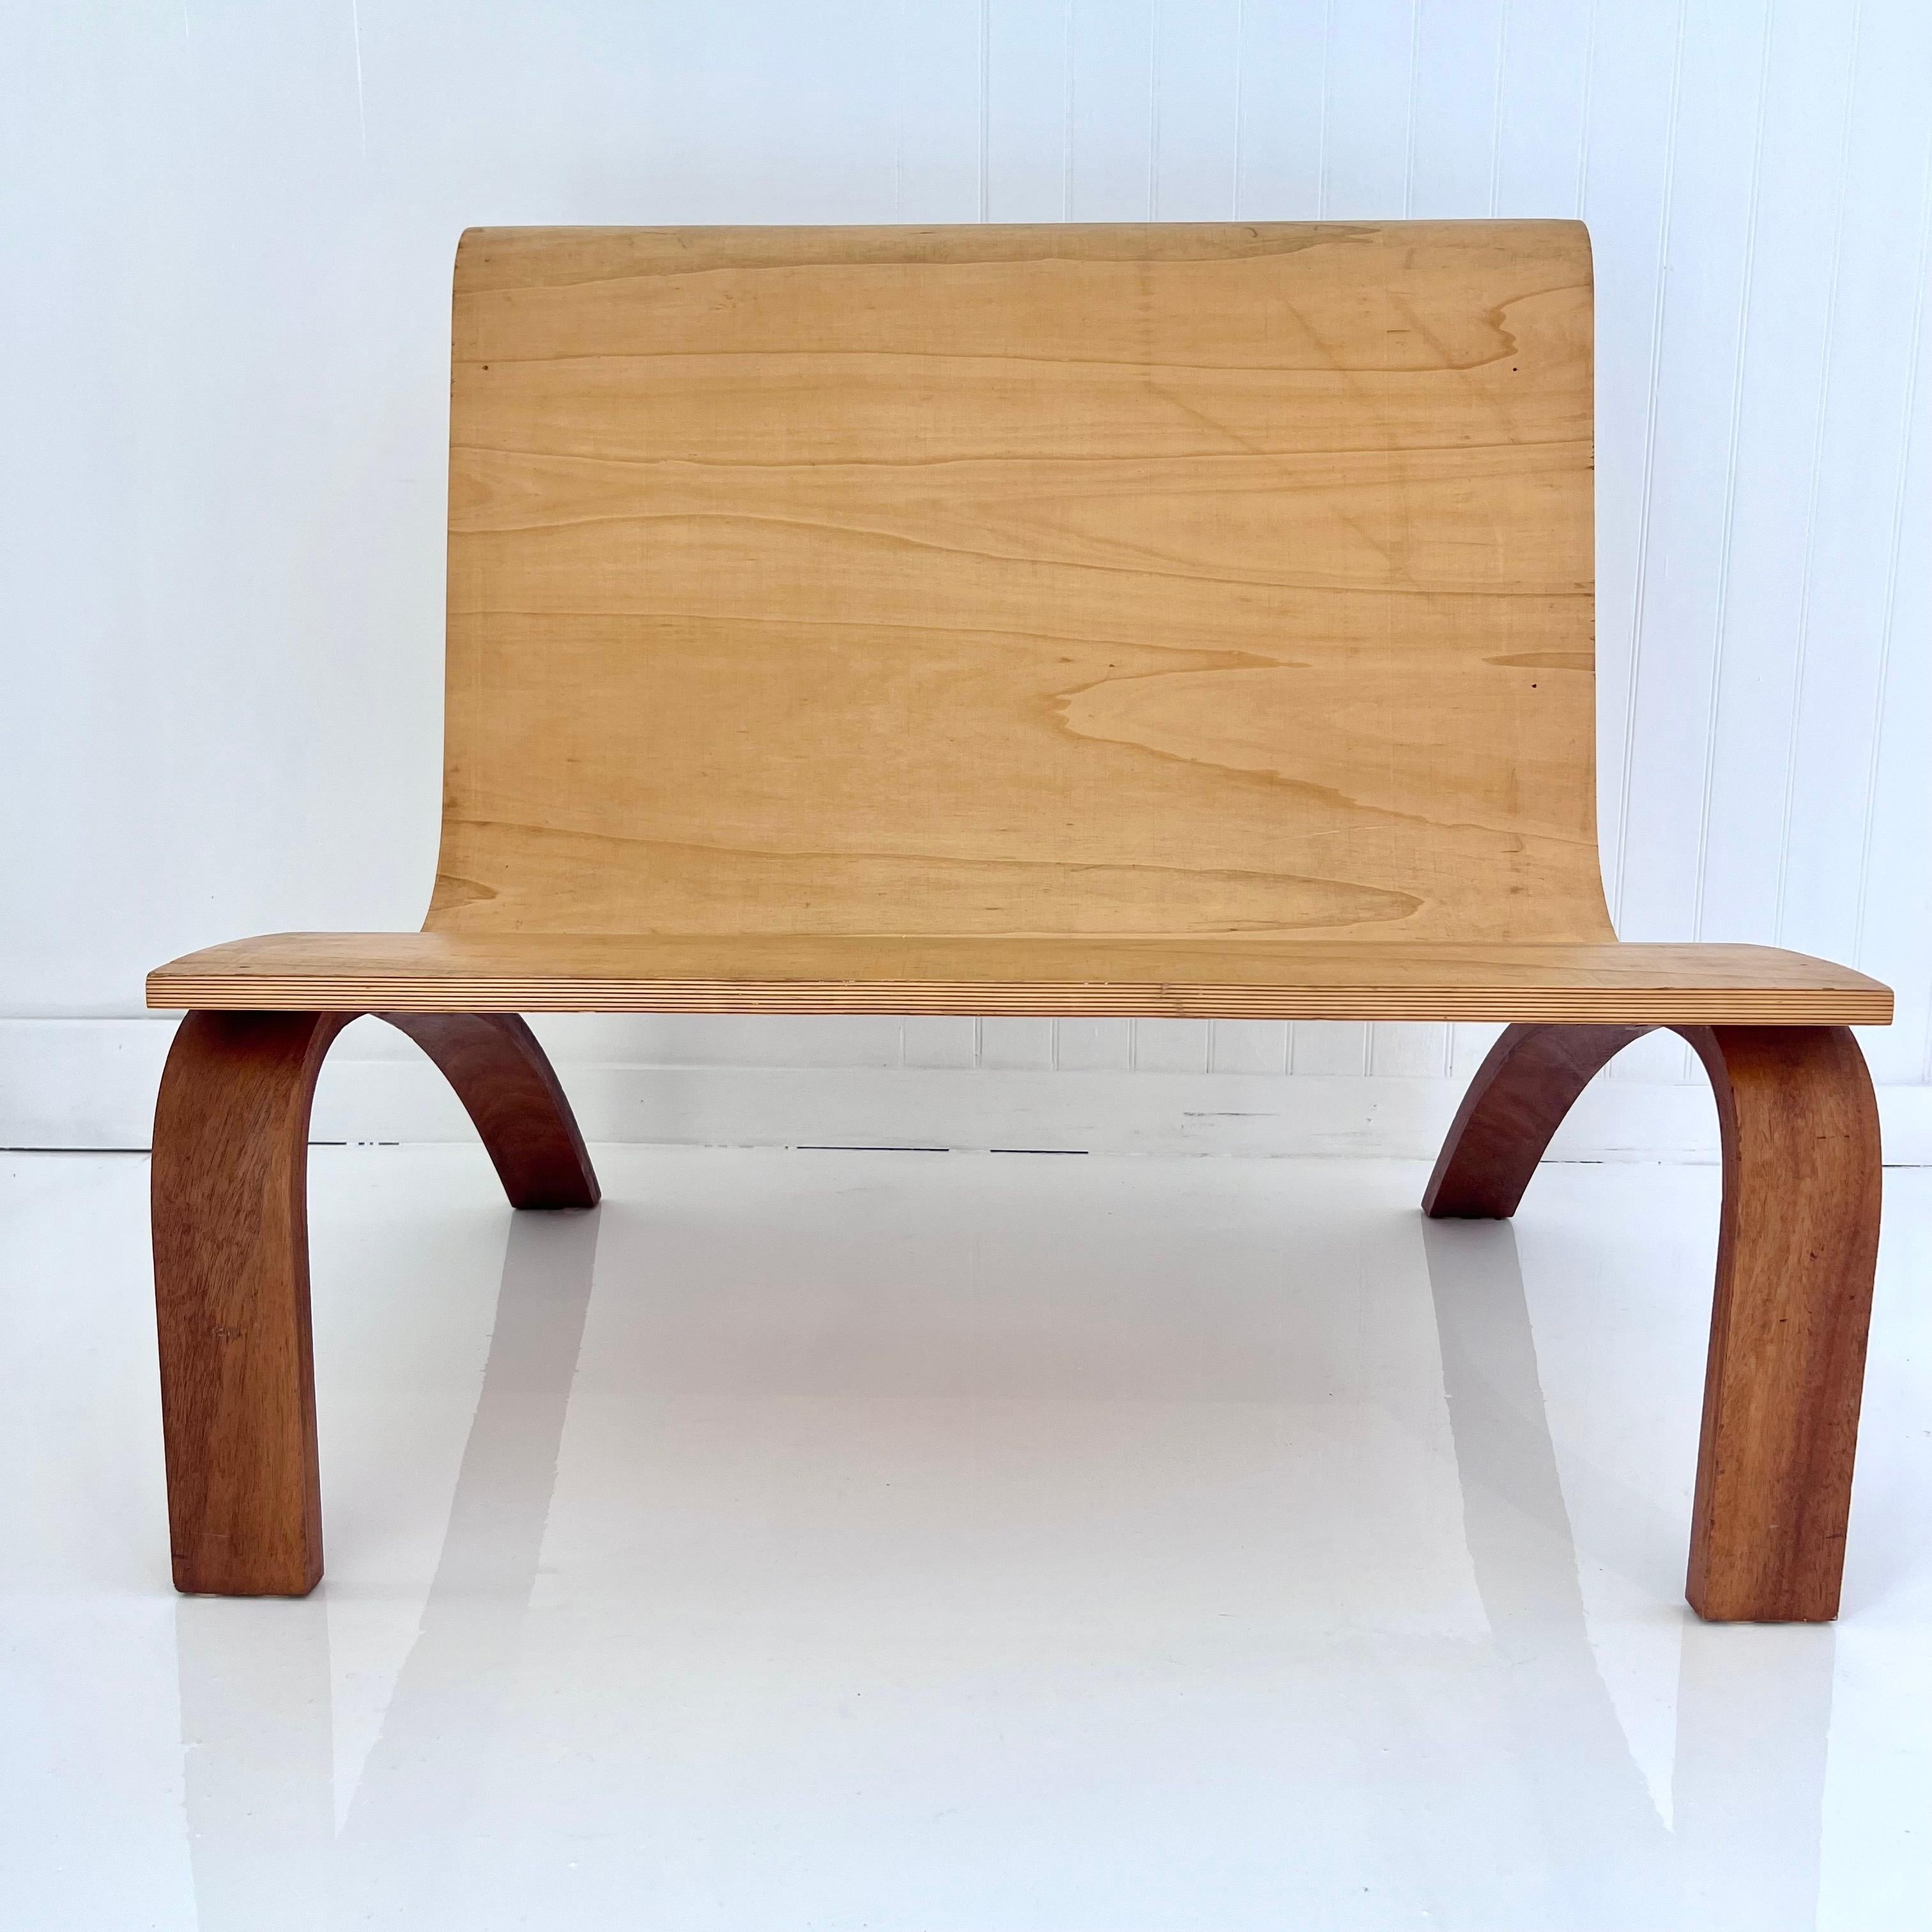 Minimal bentwood bench with plywood back and seat and contrasting dark wood legs. Beautiful curvature offers a comfortable seat for one or two adults. This bench features stunning wood grain across the seat and seat back with minimal wear and